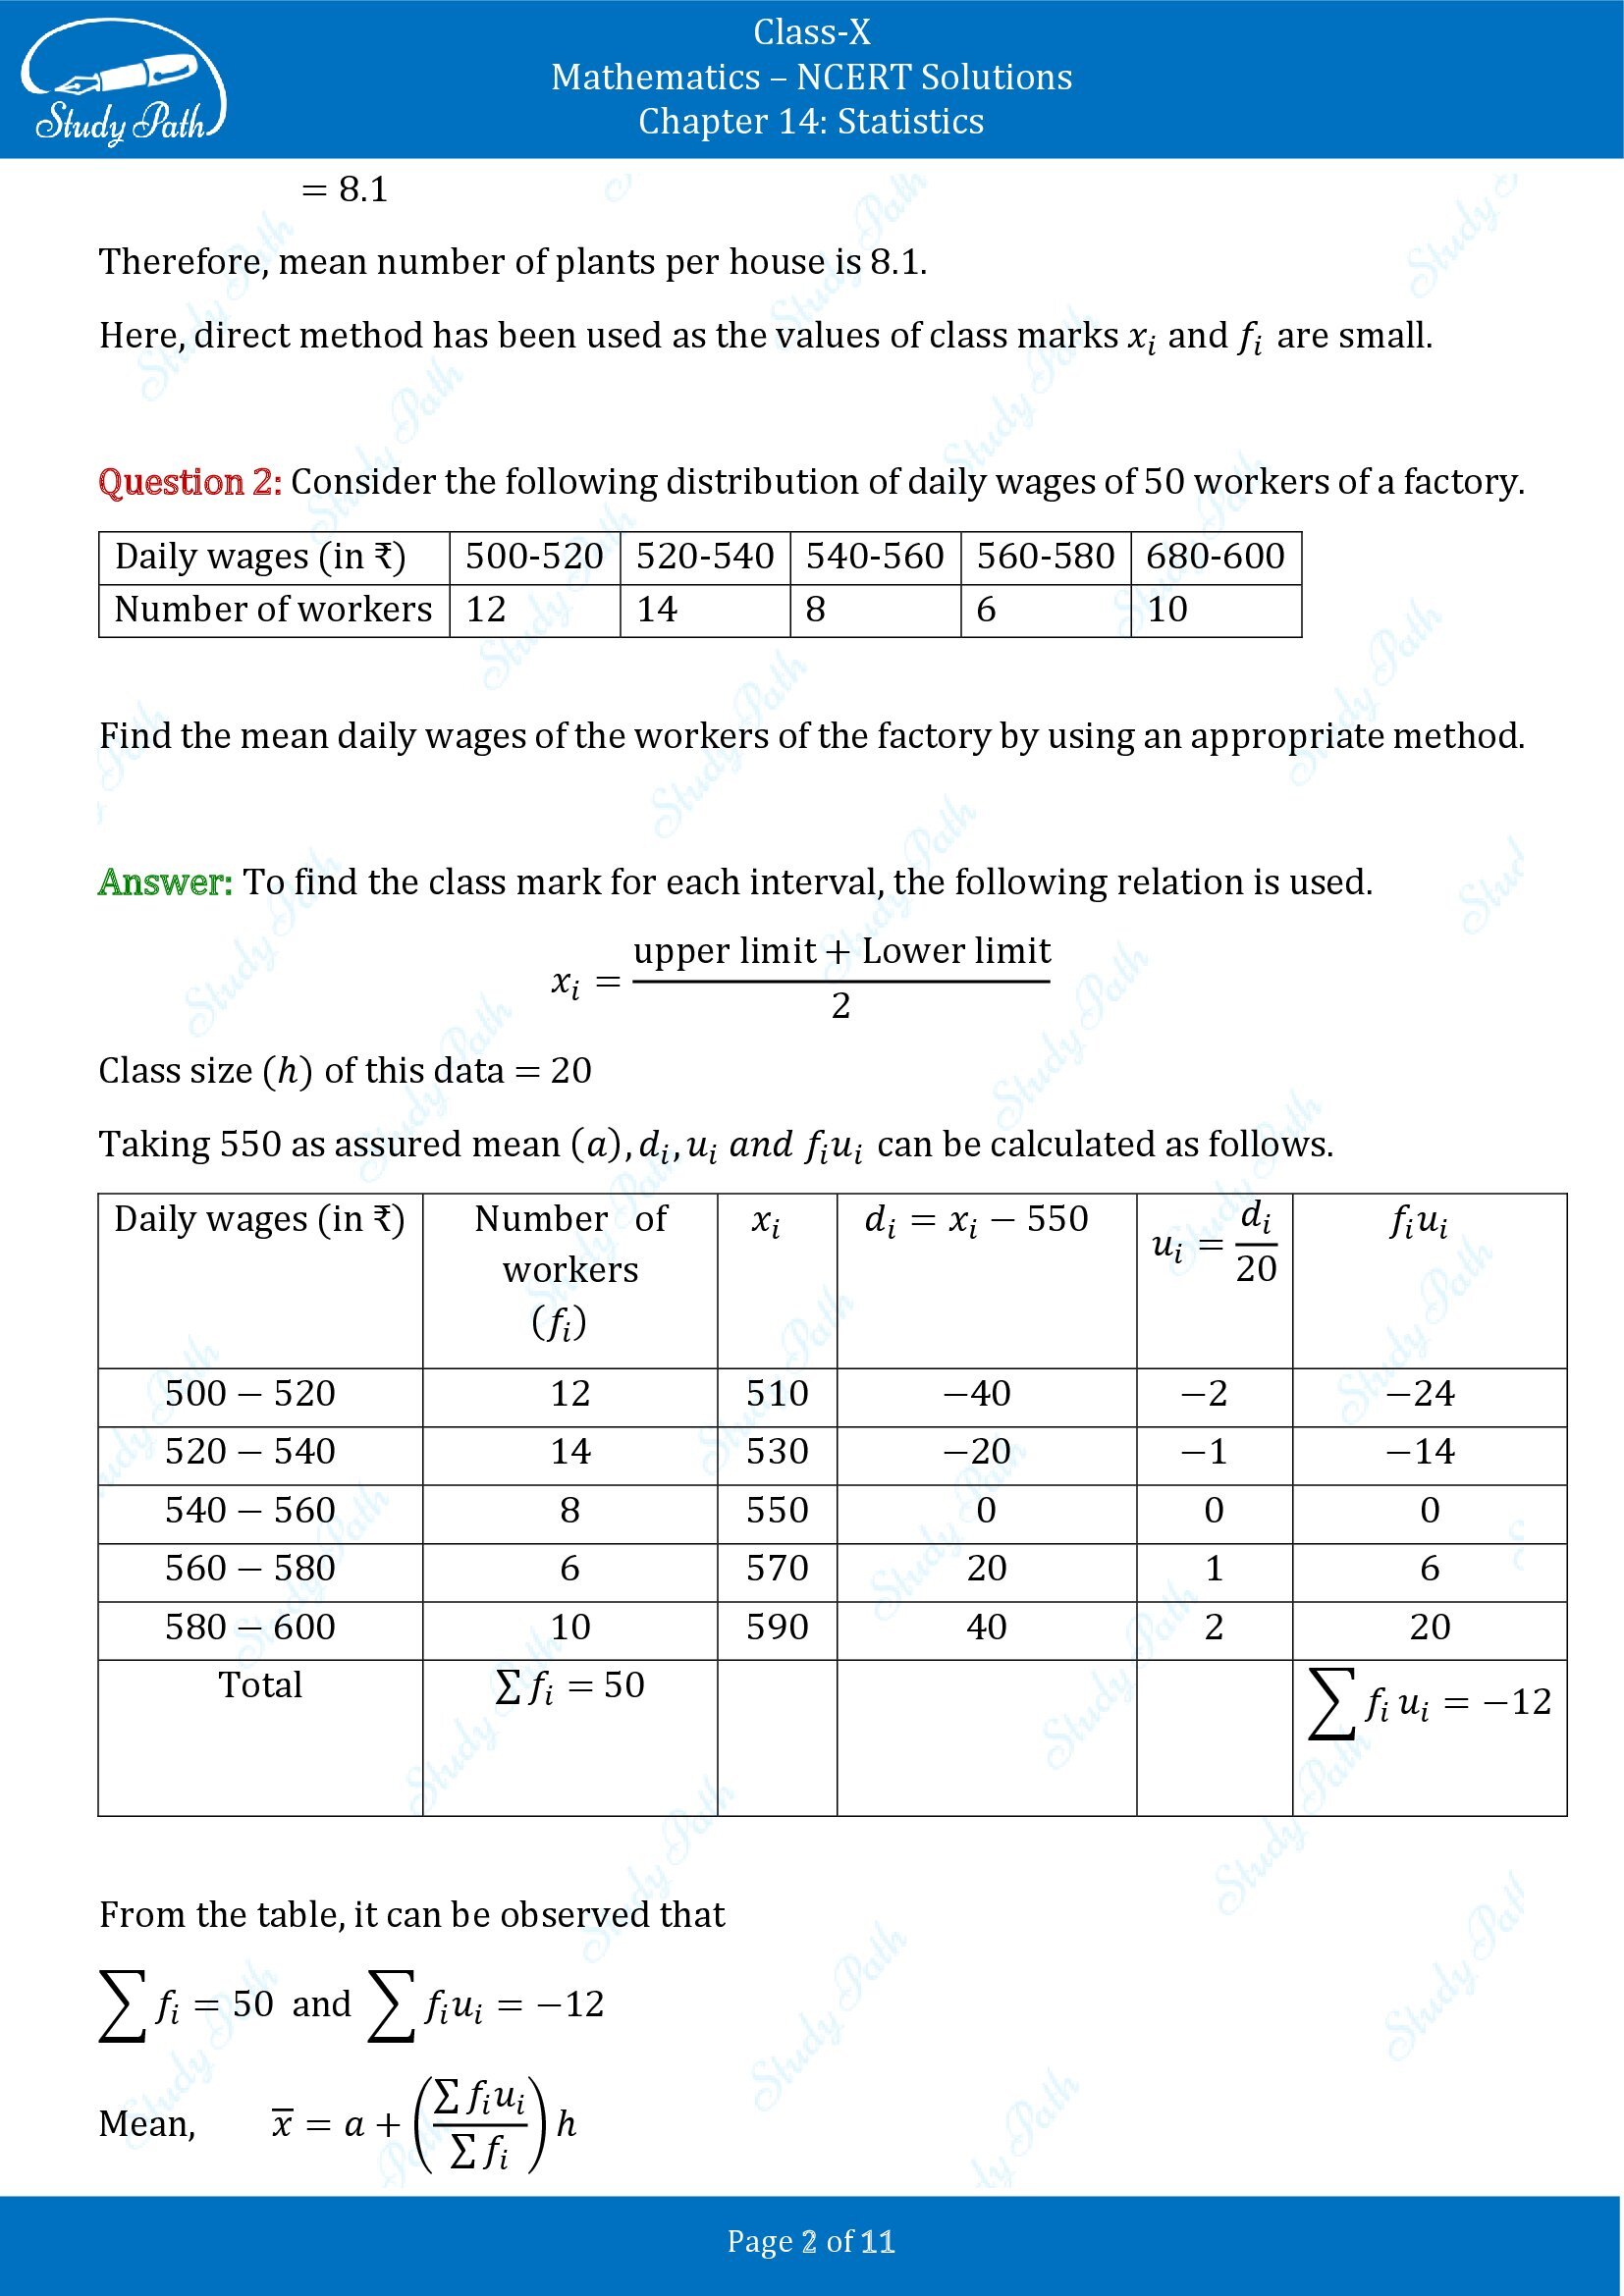 NCERT Solutions for Class 10 Maths Chapter 14 Statistics Exercise 14.1 00002